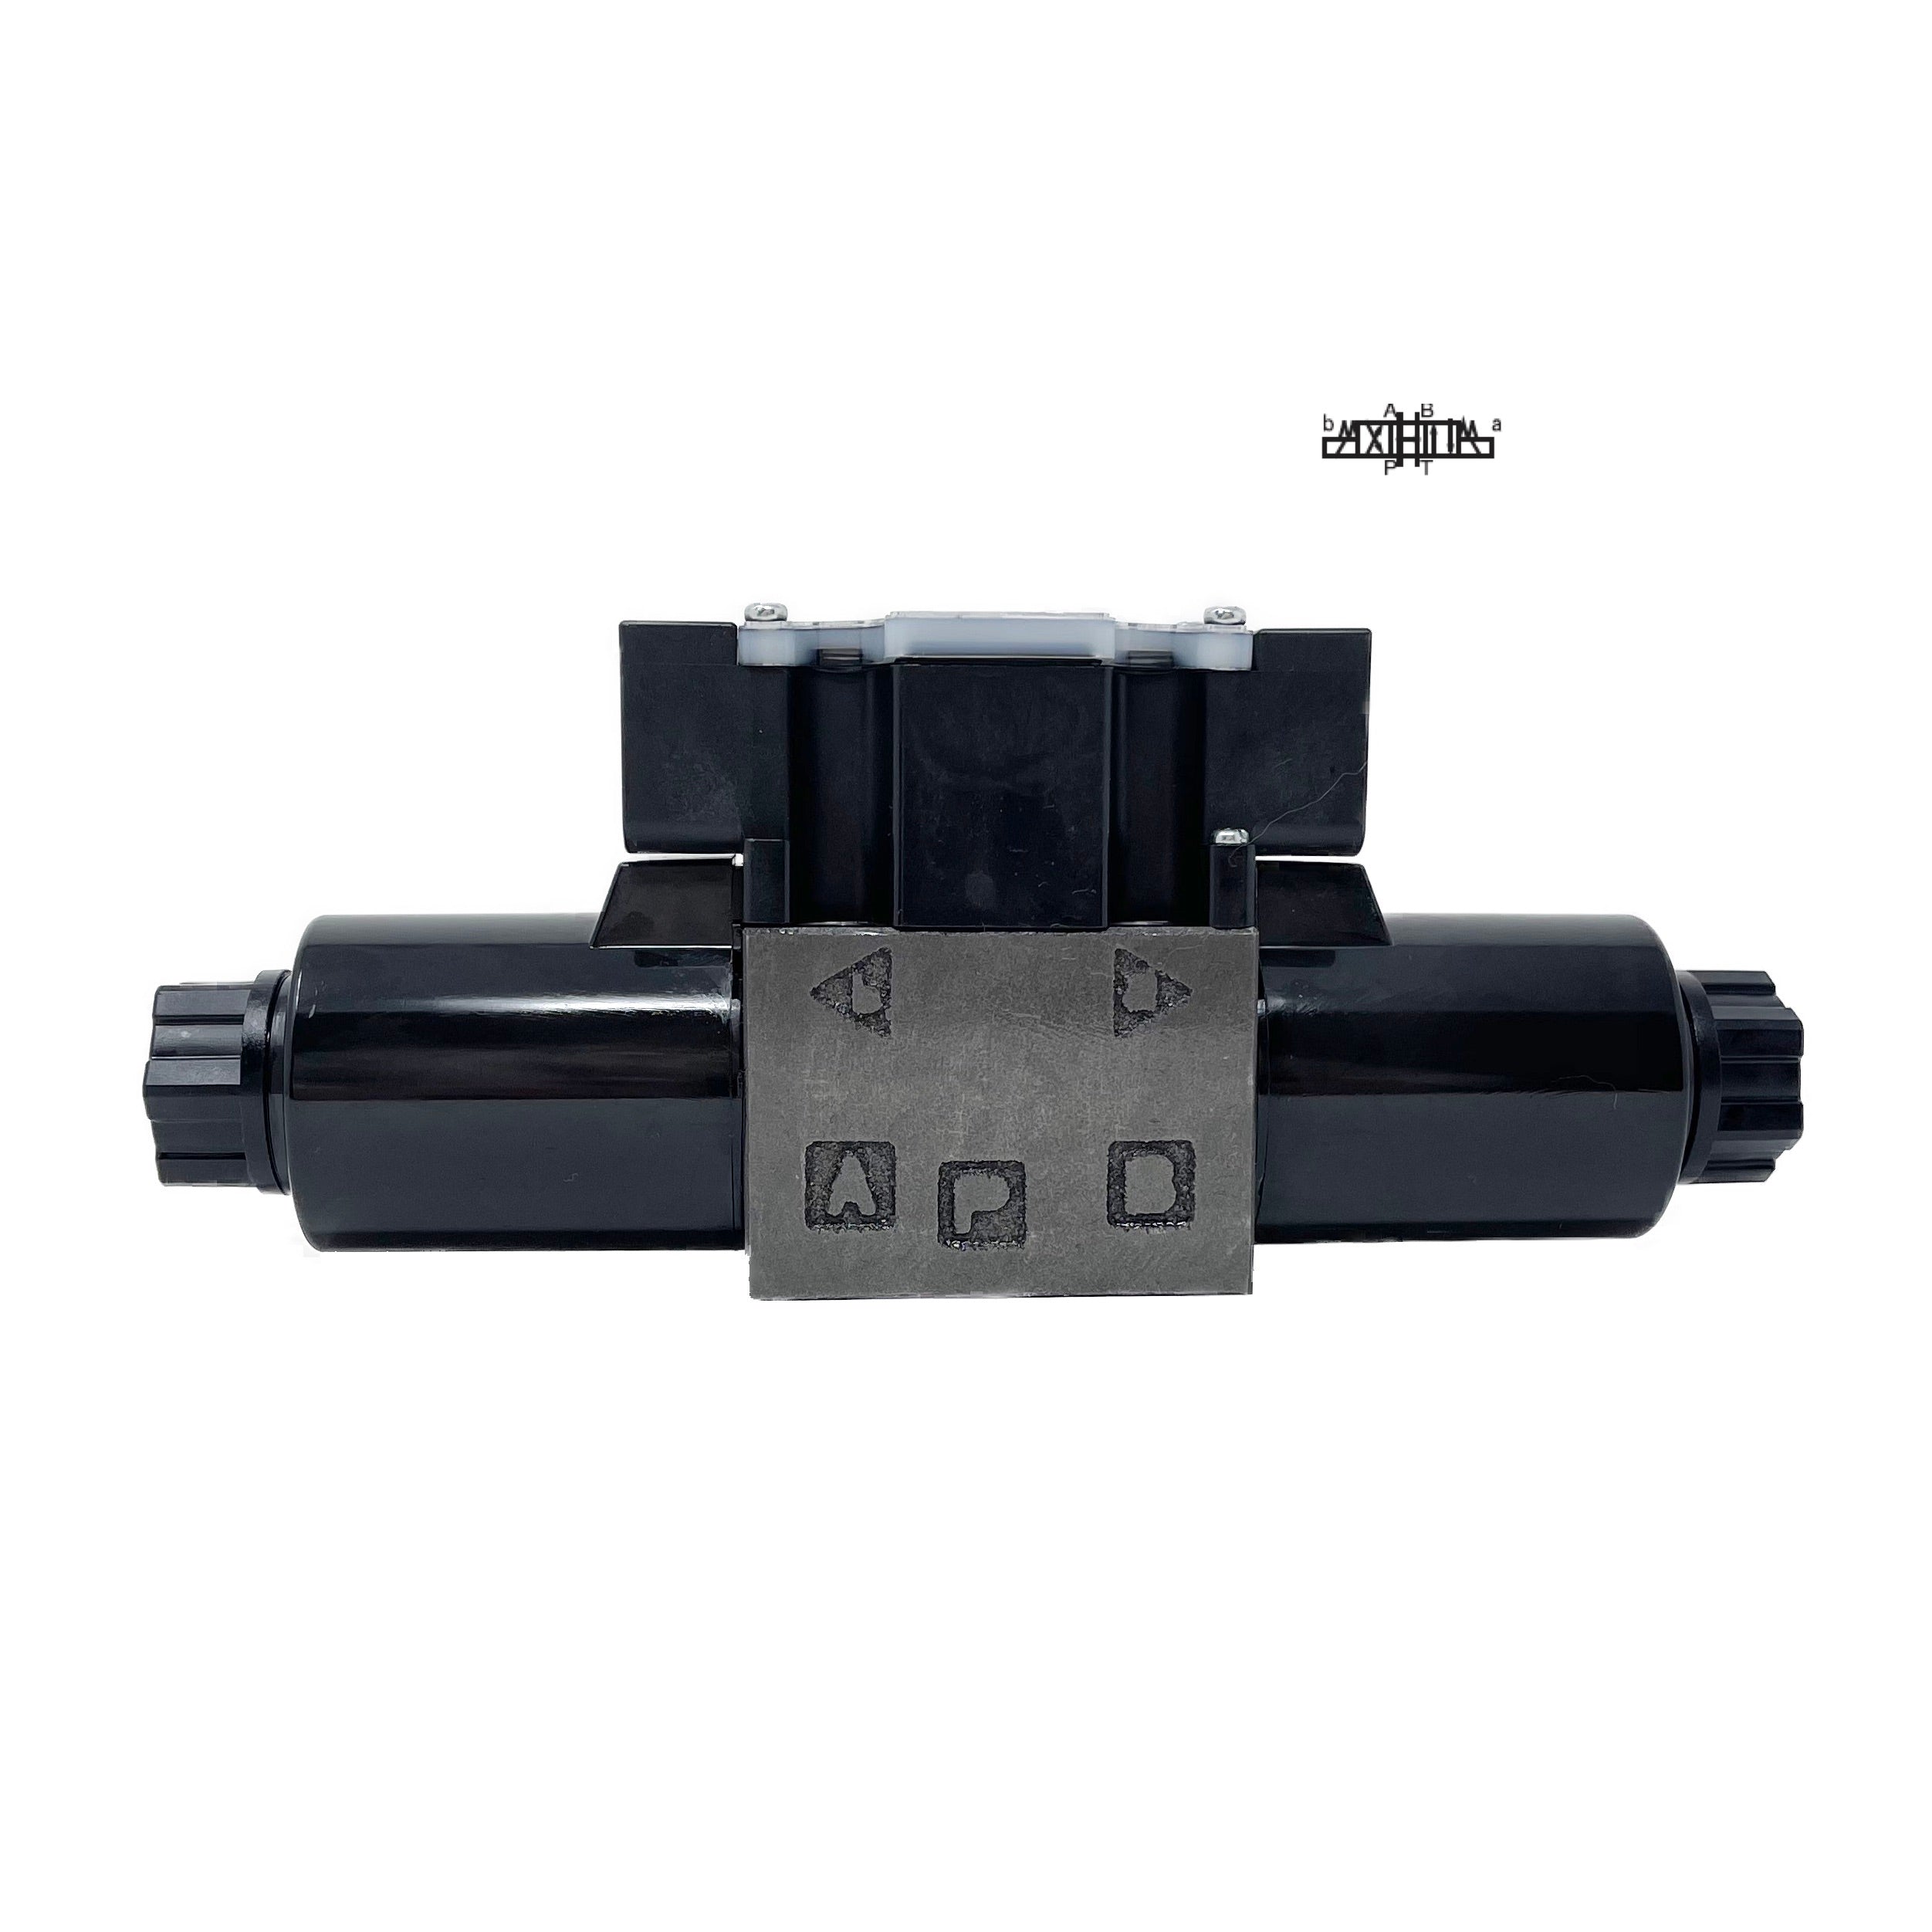 SS-G01-C4-R-E115-E31 : Nachi Solenoid Valve, 3P4W, D03 (NG6), 13.2GPM, 5075psi, All Ports Open Neutral, 115 VAC, Wiring Box with Lights & Built-in Rectifier